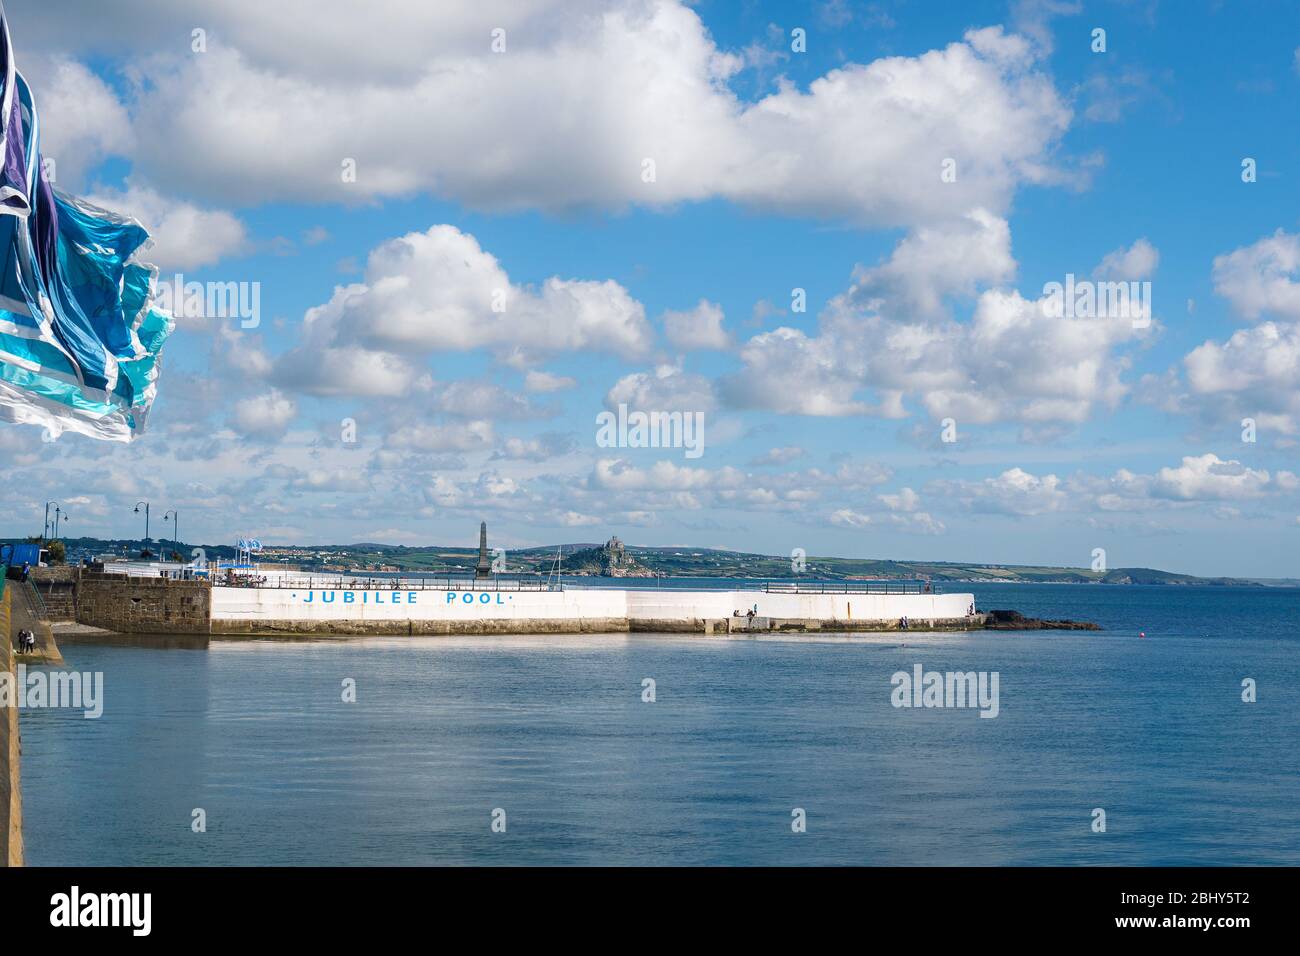 Jubilee Pool, Penzance, Cornwall, UK: Art deco, sea water filled lido at Penzance, Cornwall. St Michael's Mount in background Stock Photo